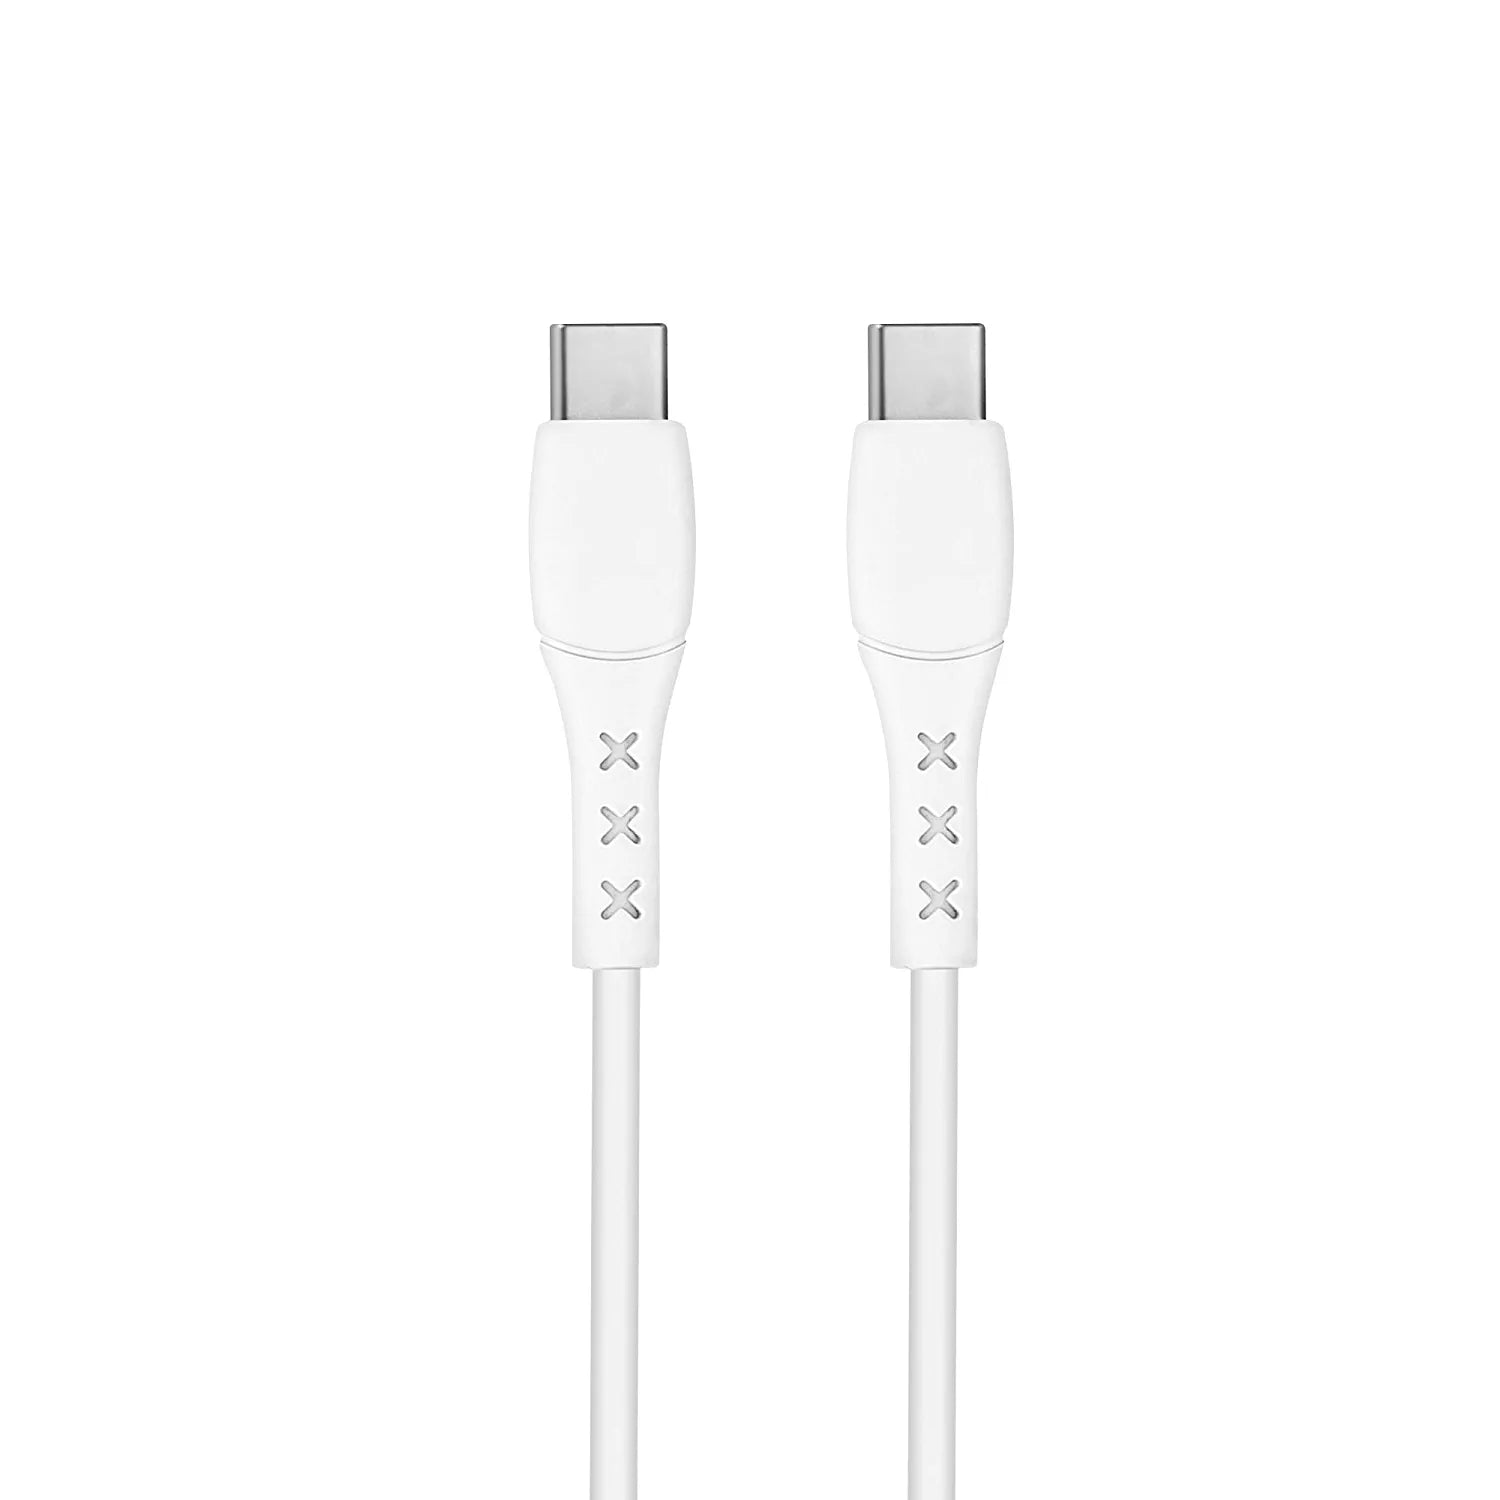 USB C to USB C Fast Charging Cable (60W~20/3A) Type C to Type C QC 3.0 Charging Cable (3.3 Feet Long, White)